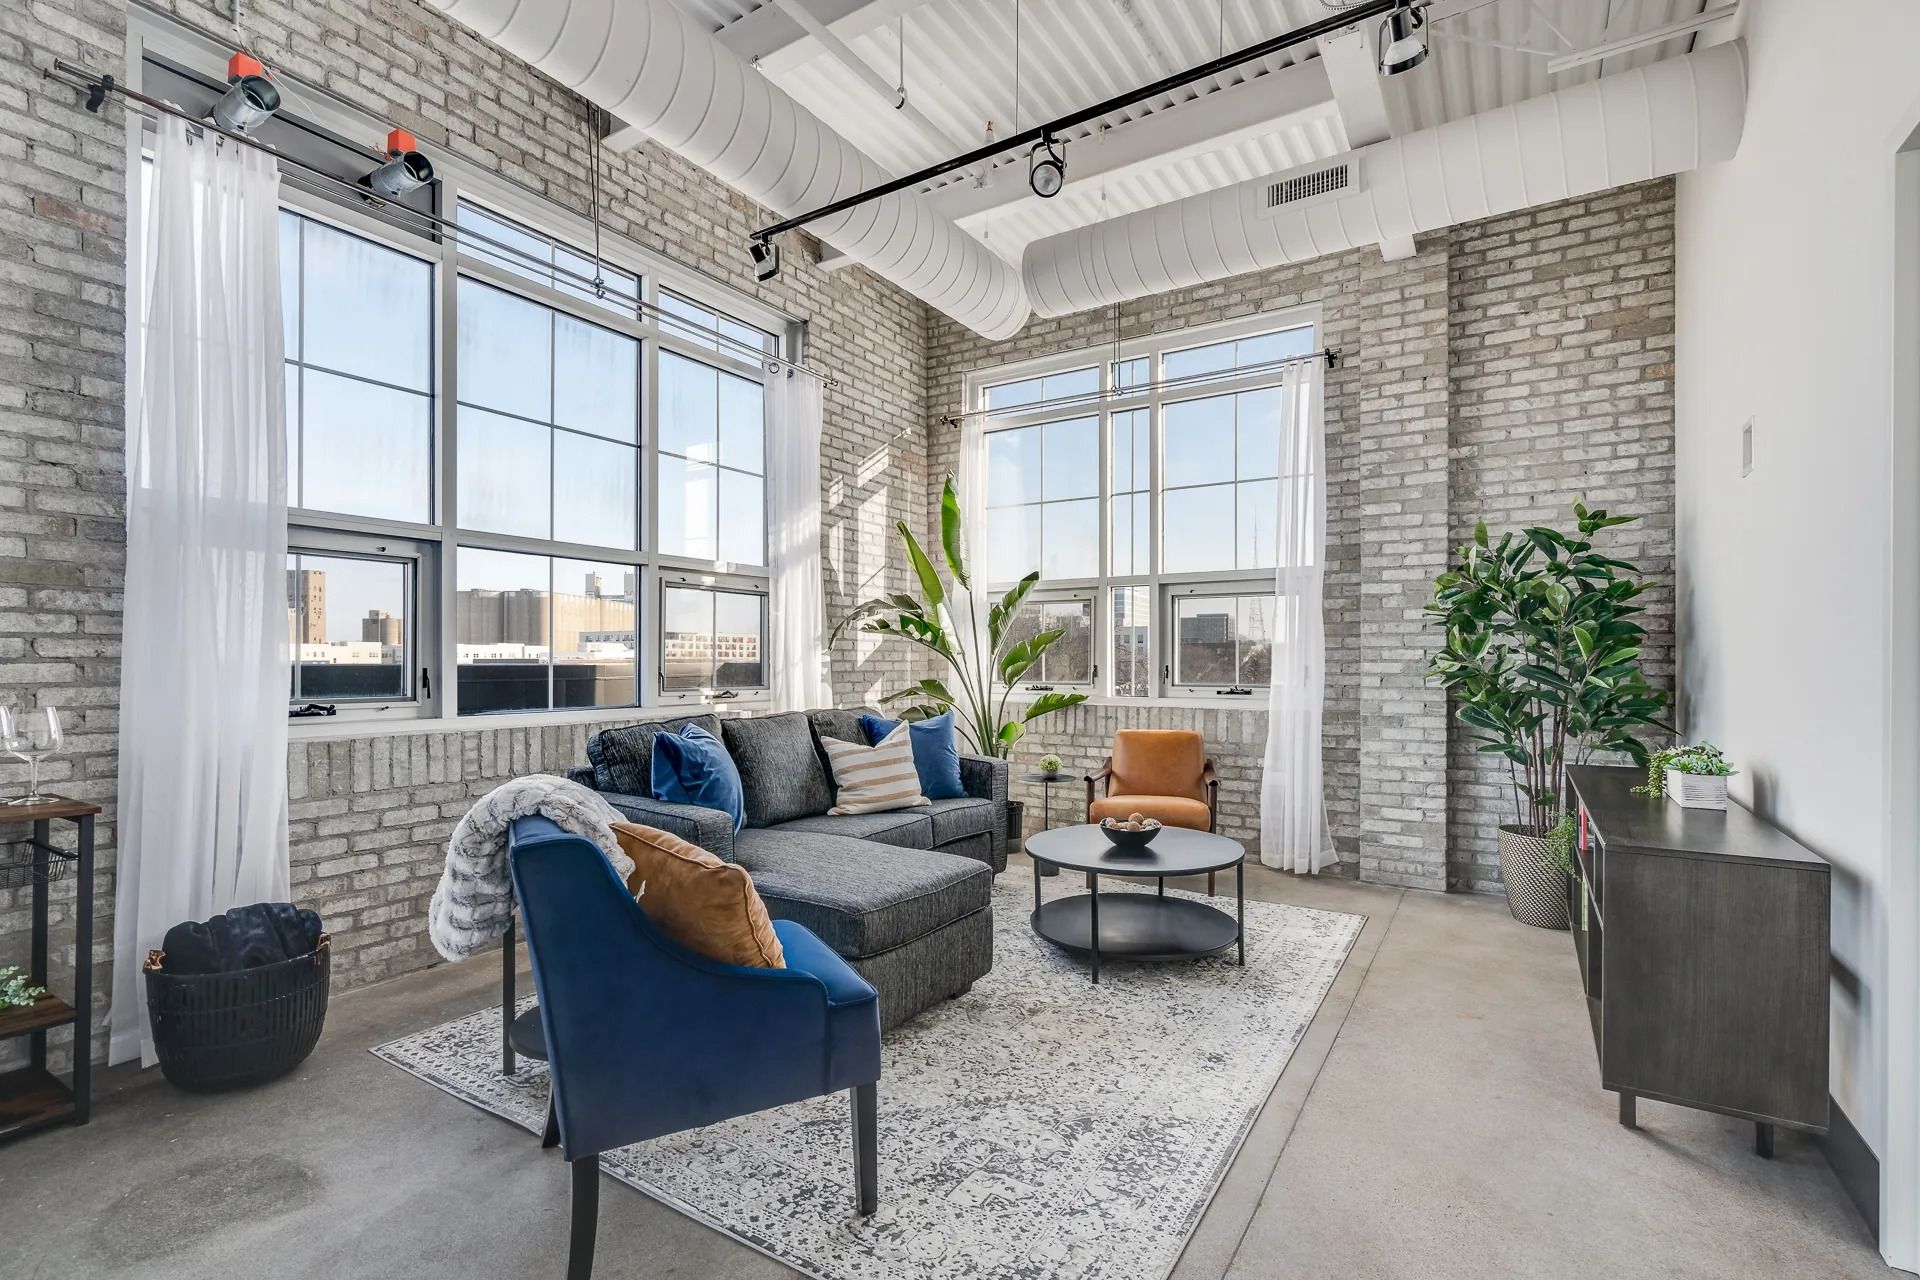 Beautiful warehouse conversion apartment with exposed brick, extra large windows, and high ceilings